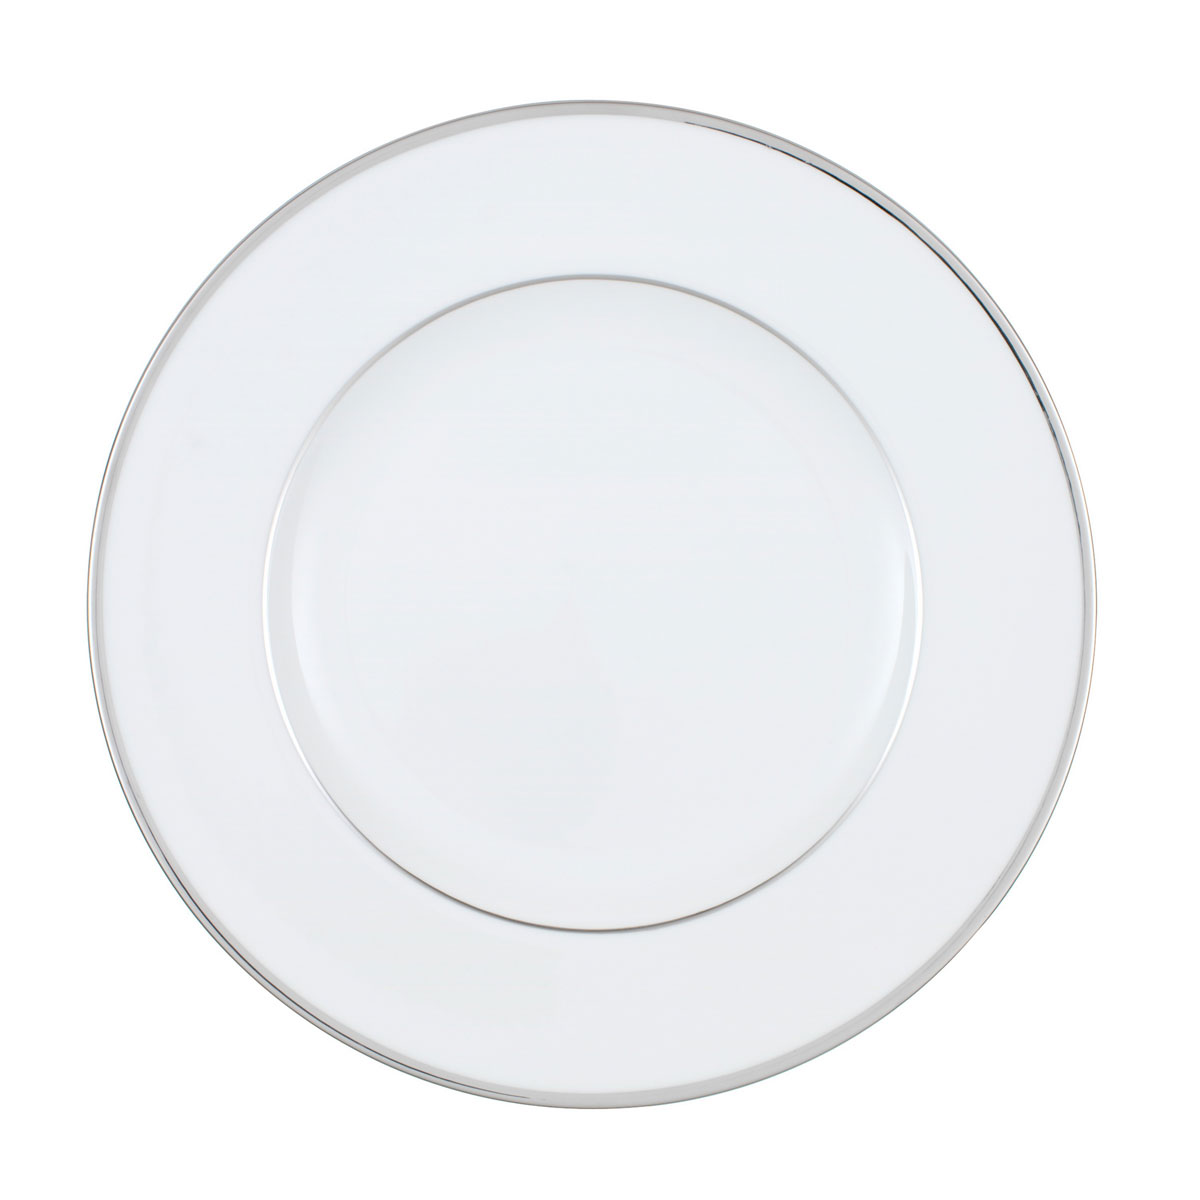 Villeroy and Boch Anmut Platinum No1 Dinner Plate, Single